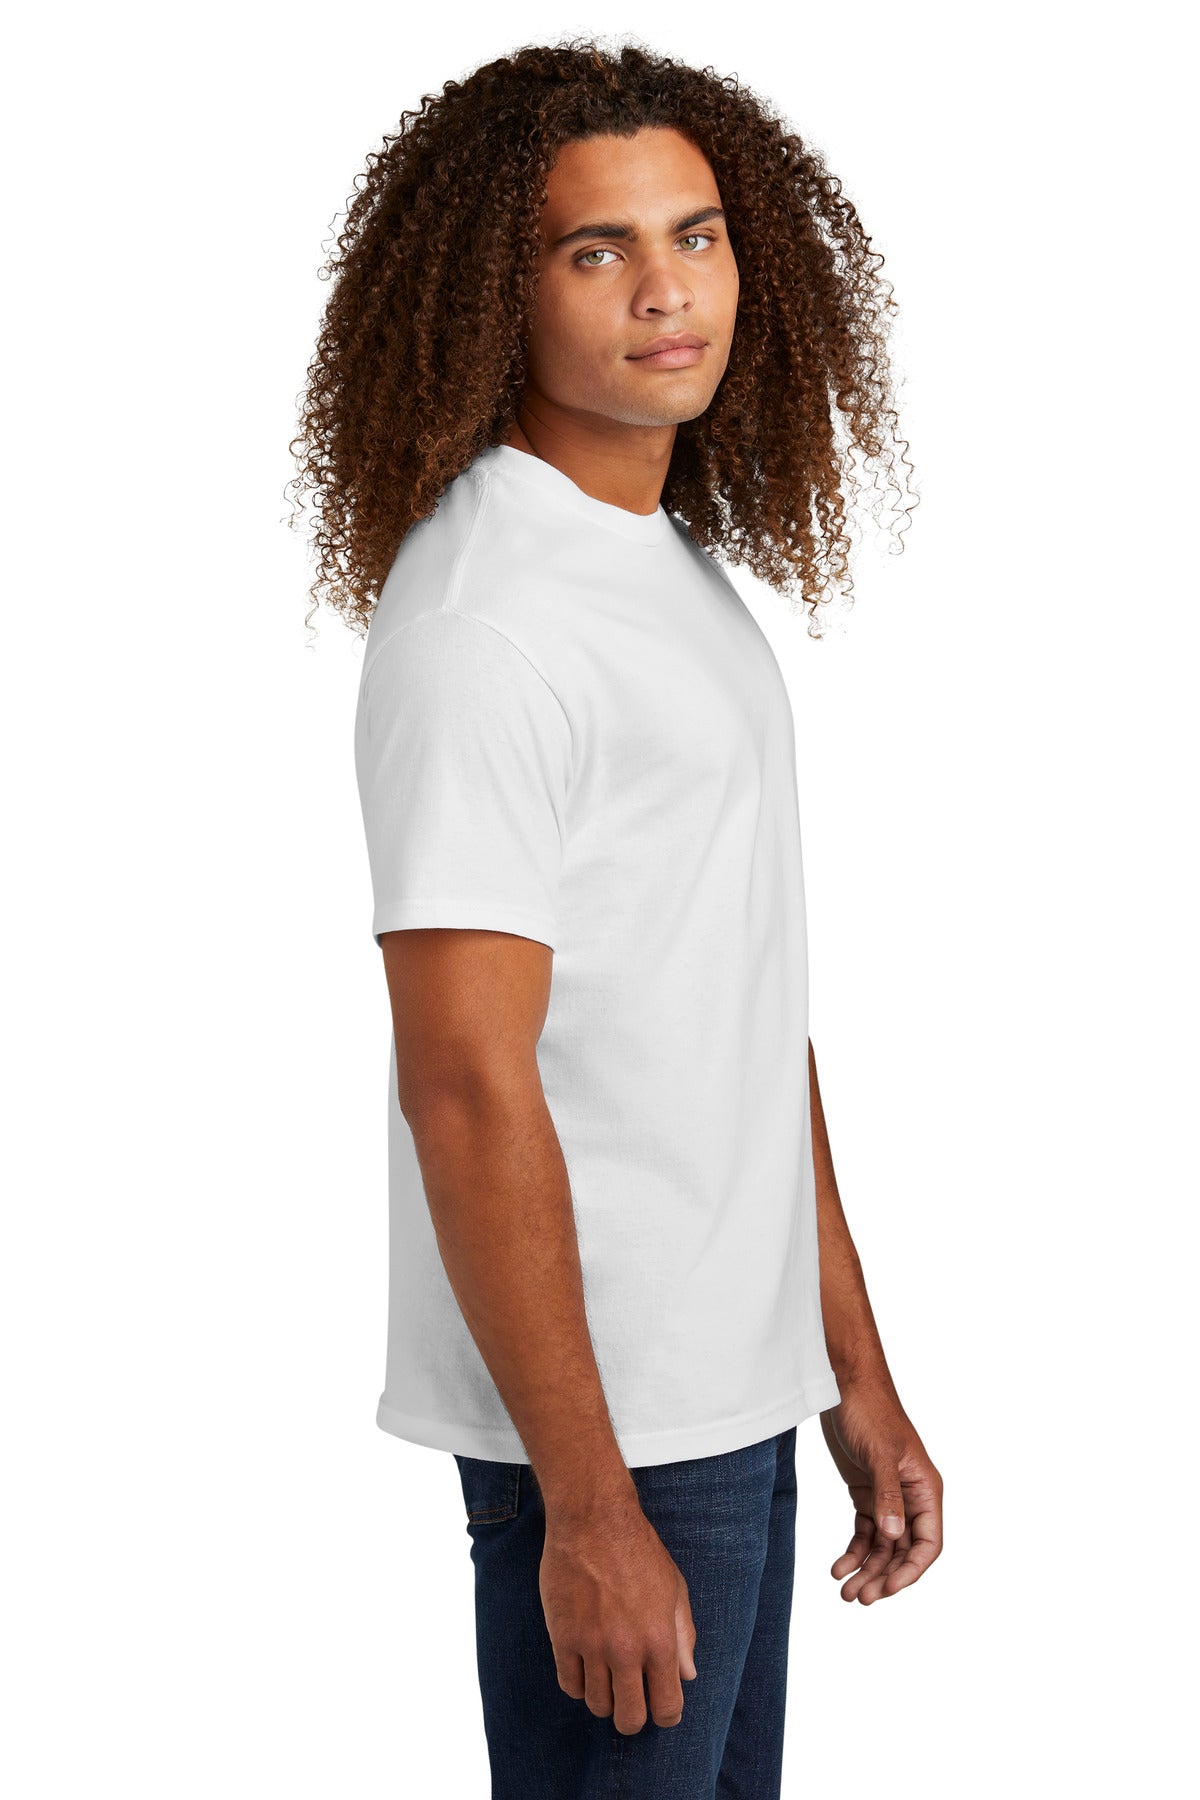 American Apparel® Relaxed T-Shirt 1301W [White] - DFW Impression